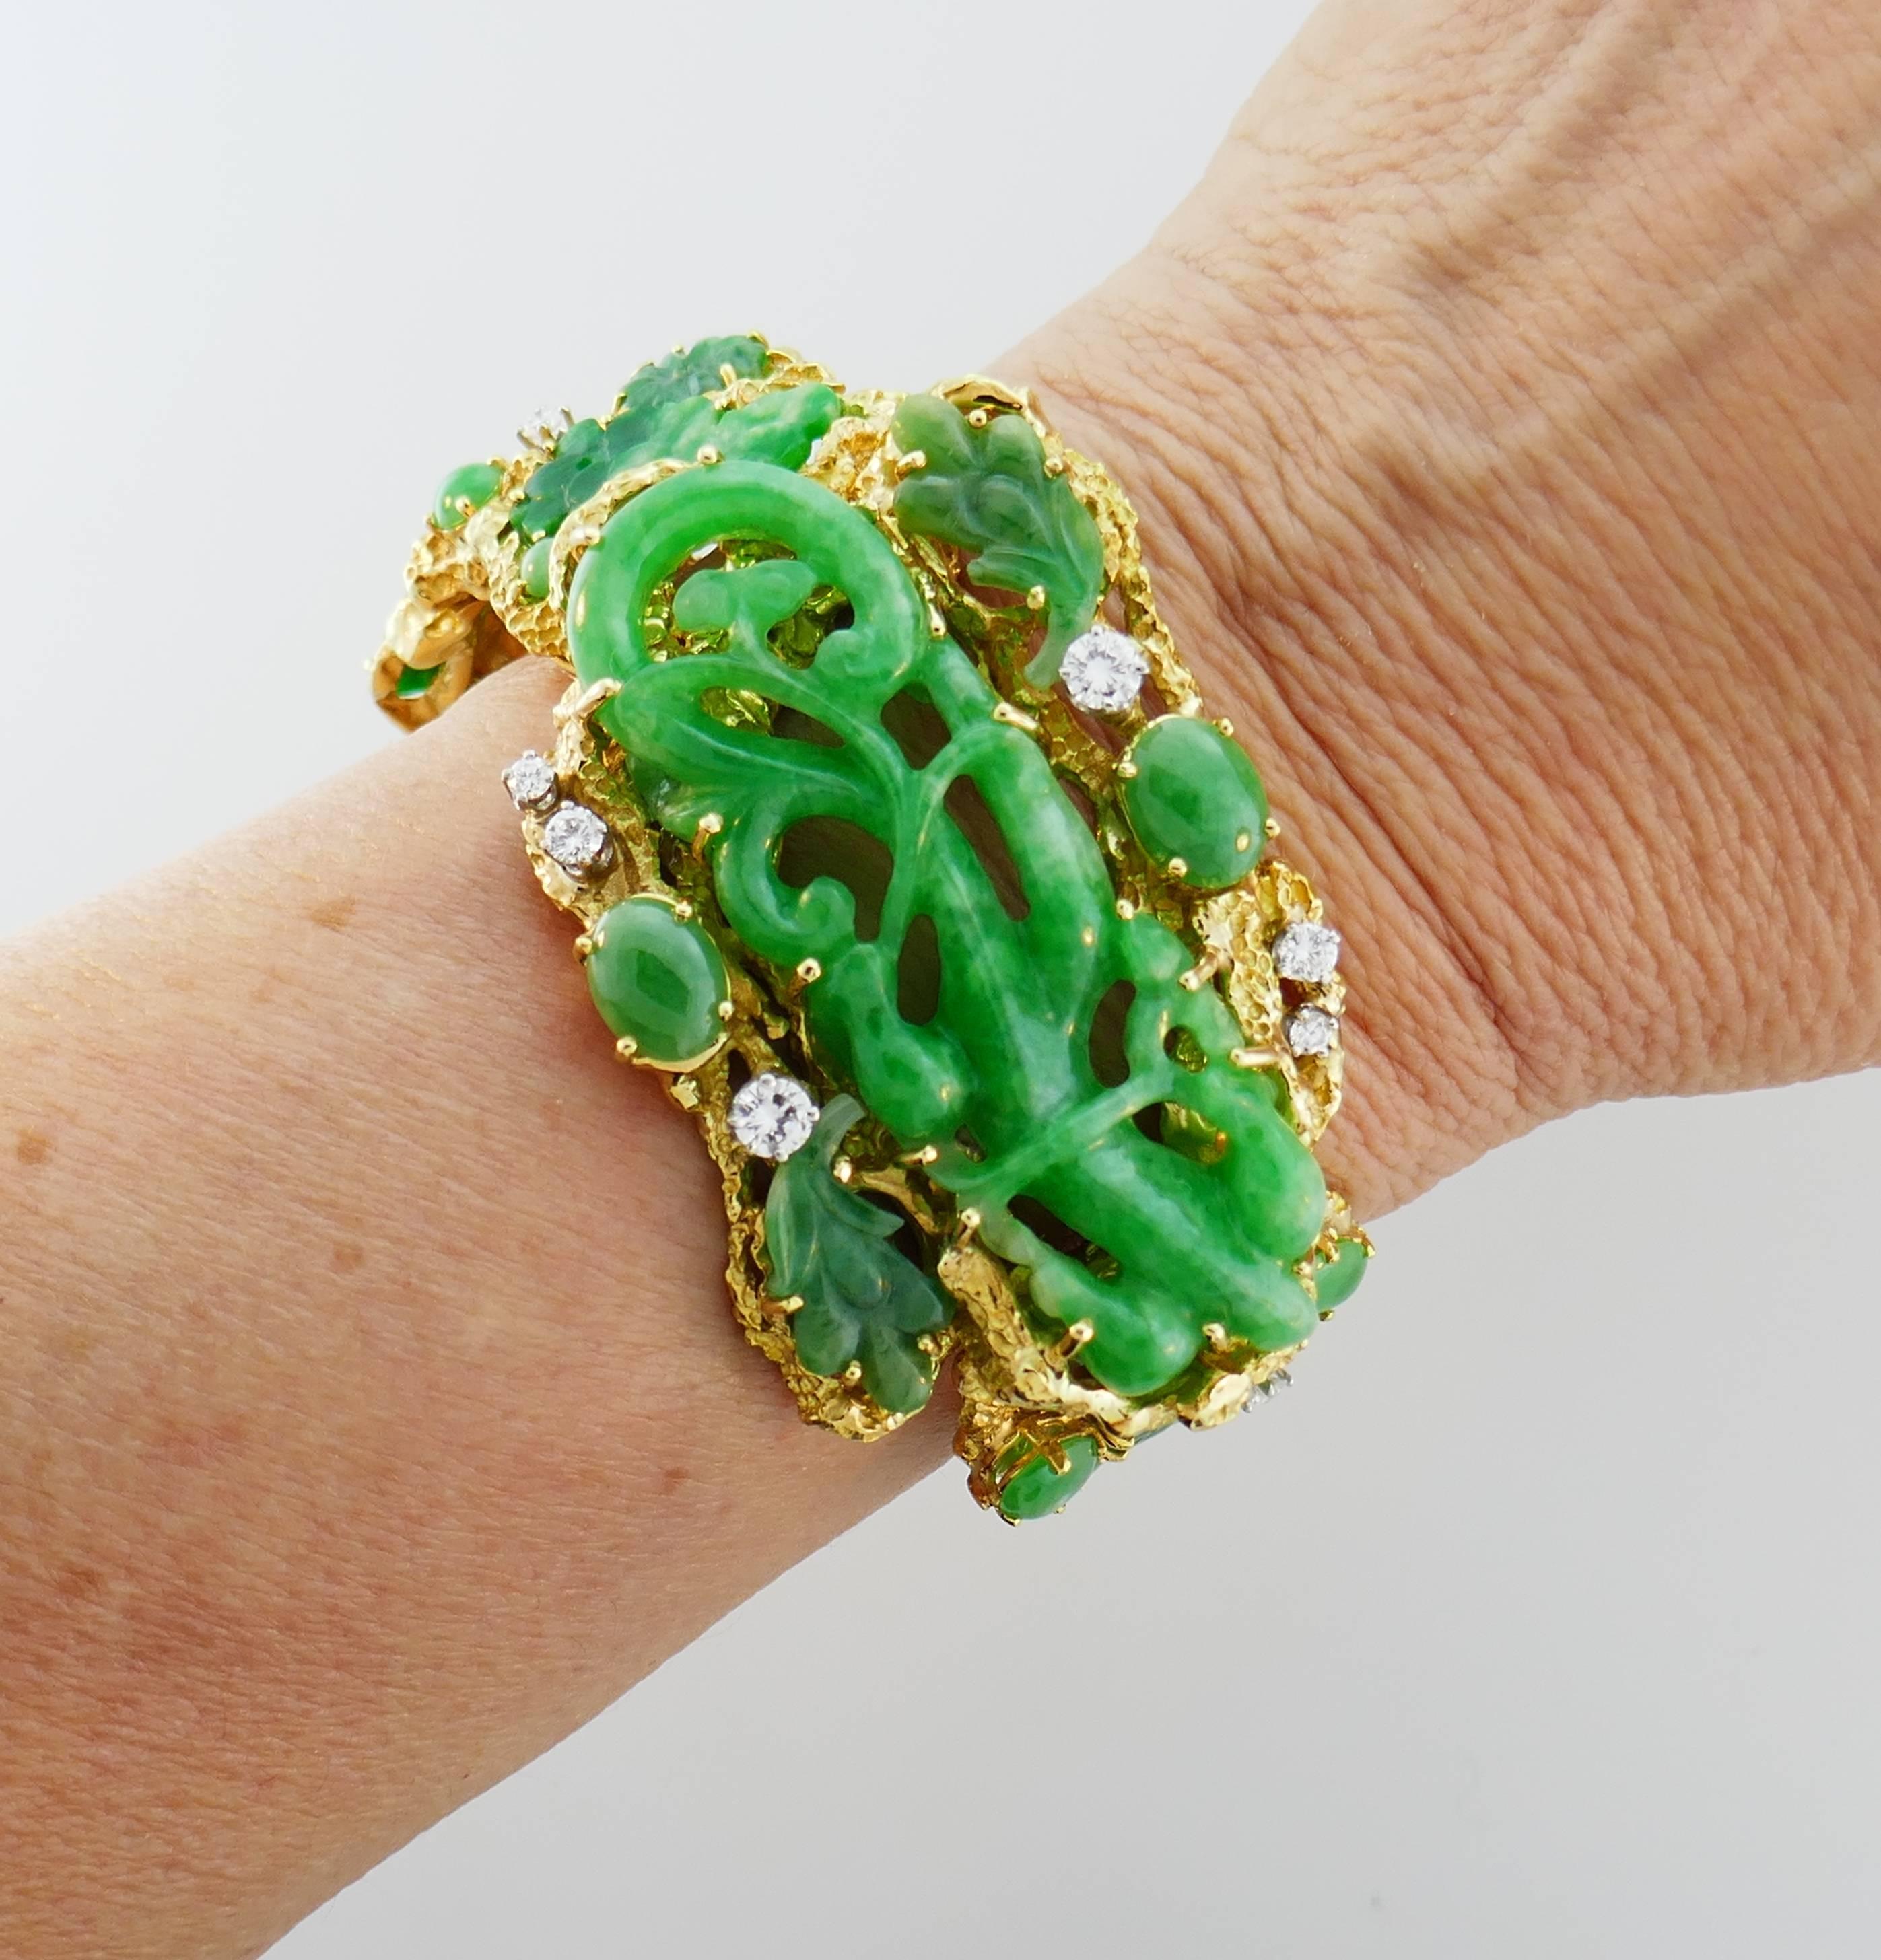 Whimsical, colorful bracelet that is a great addition to your jewelry collection. 
Made of 18 karat (tested) yellow gold, beautifully carved jadeite and accented with eleven round full-cut diamonds (G-H color, VS clarity, total weight approximately